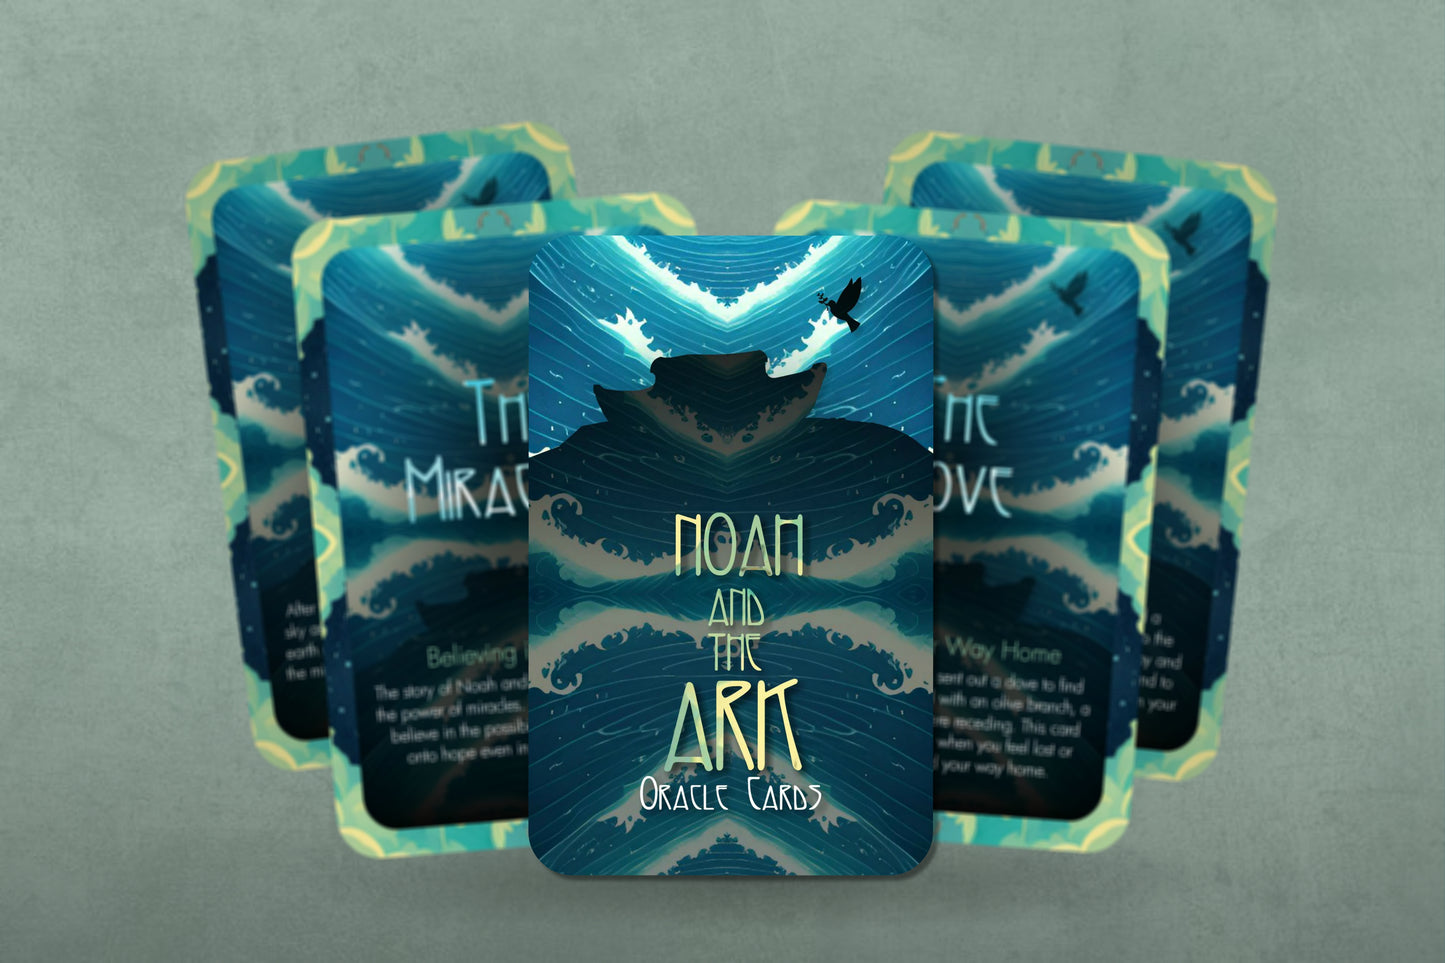 Noah and the Ark - Oracle cards